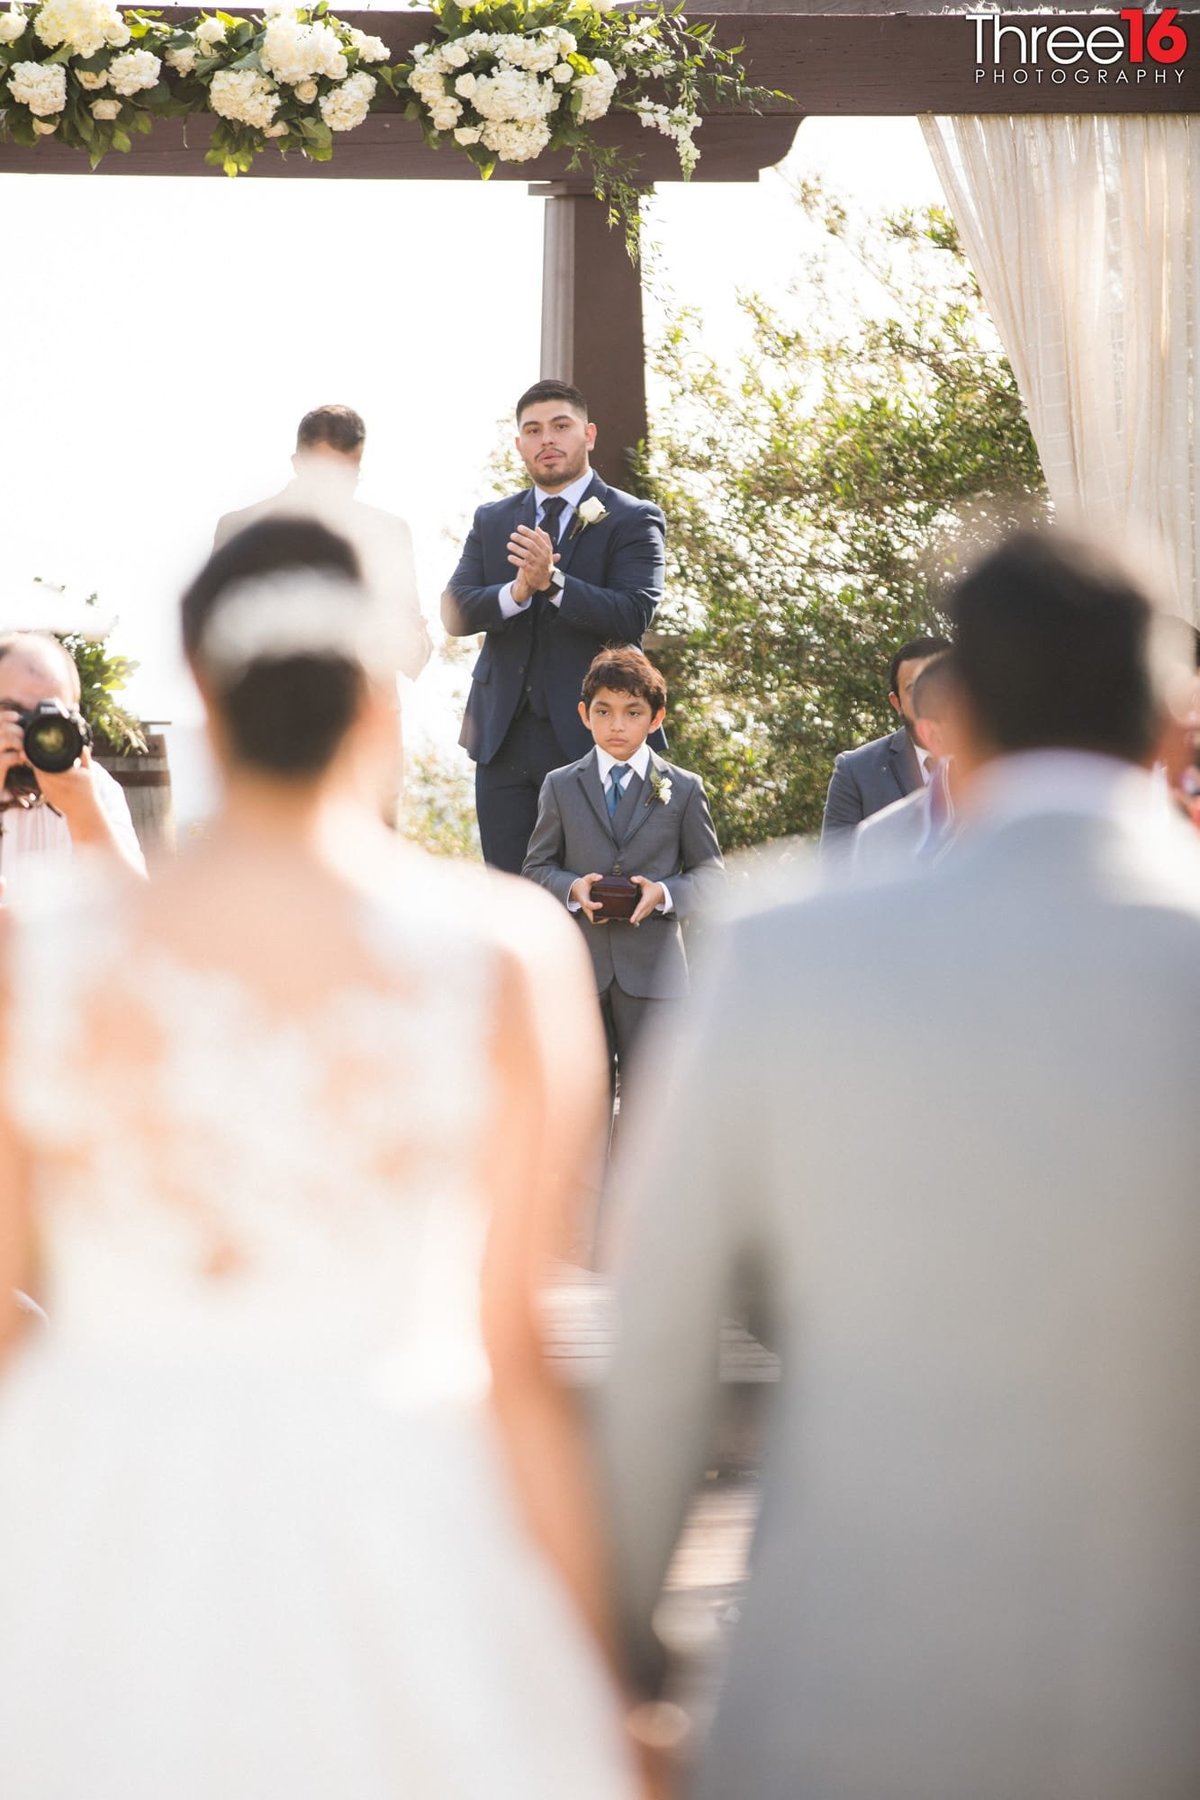 Groom waits at the altar as his Bride is being escorted up the aisle by her father